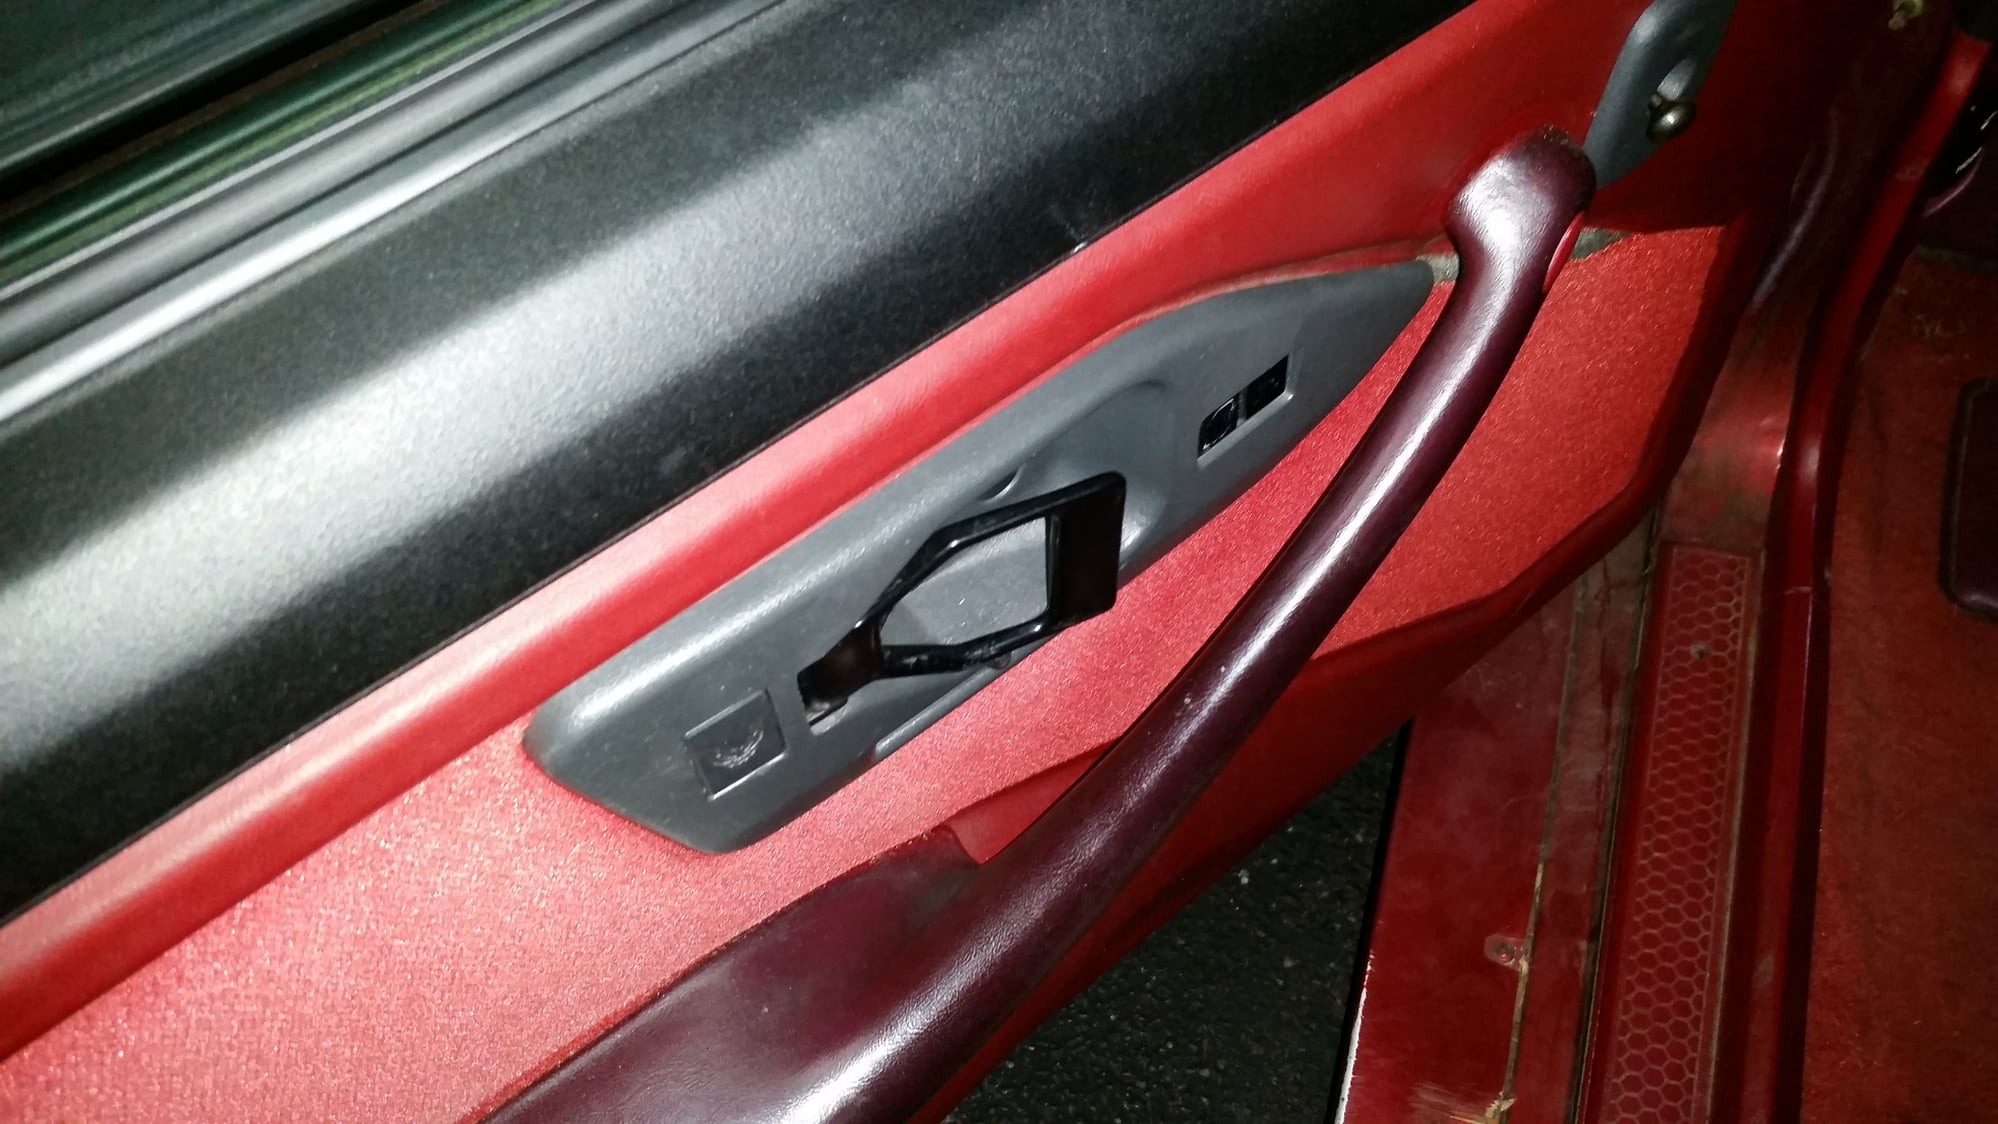 Car door handle defects – what can be done?